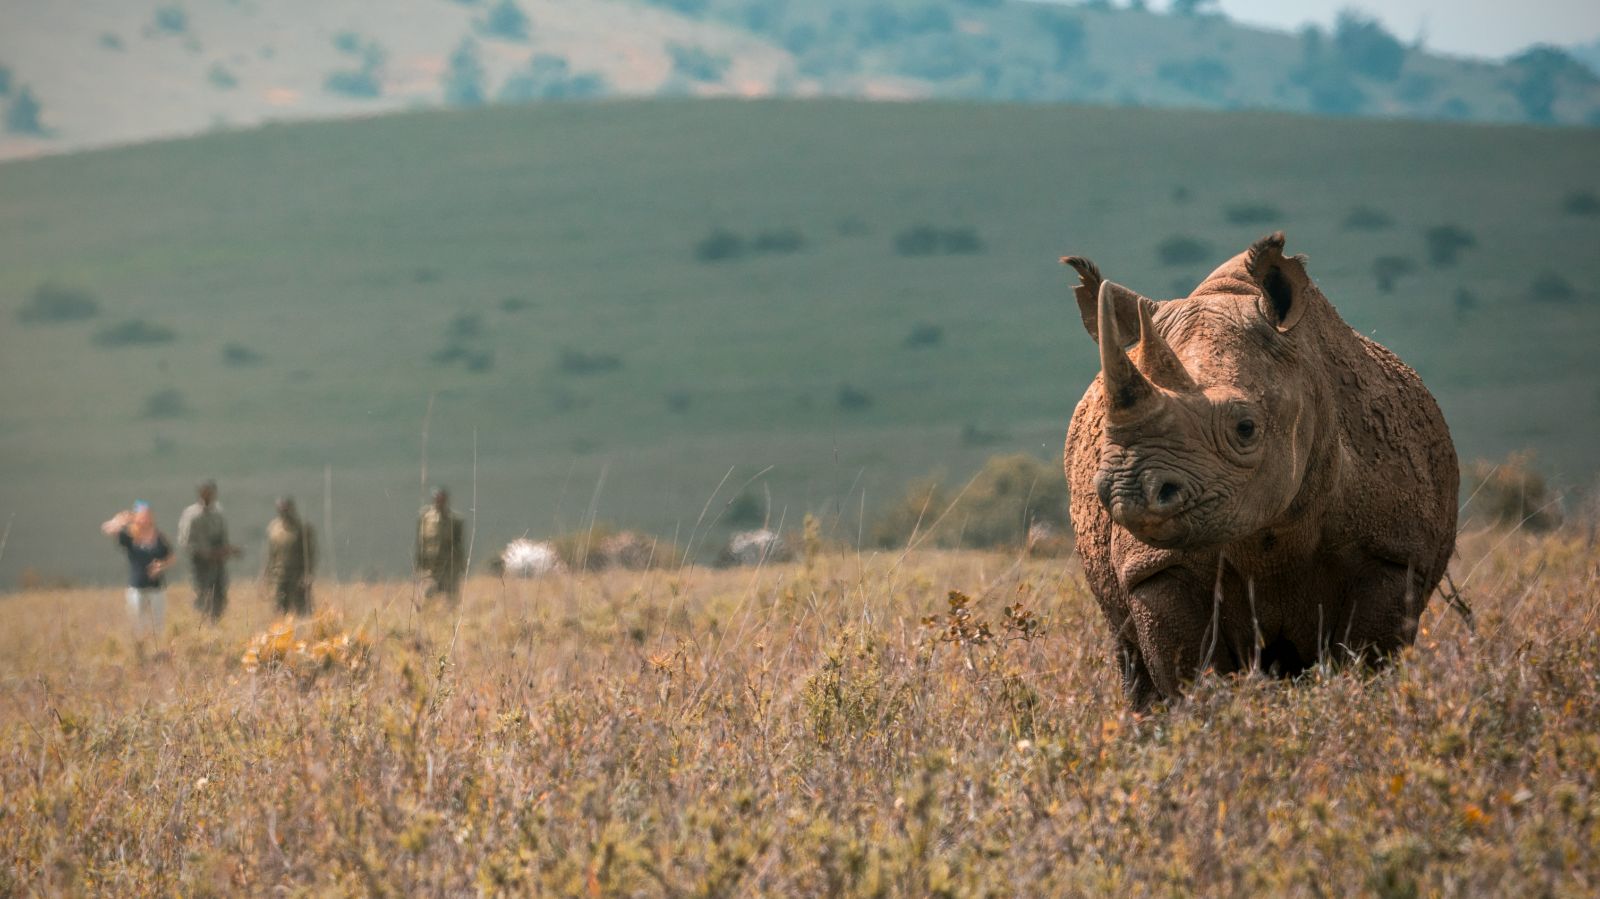 A rhino spotted on the grounds of Lengishu private house in Laikipia in Kenya